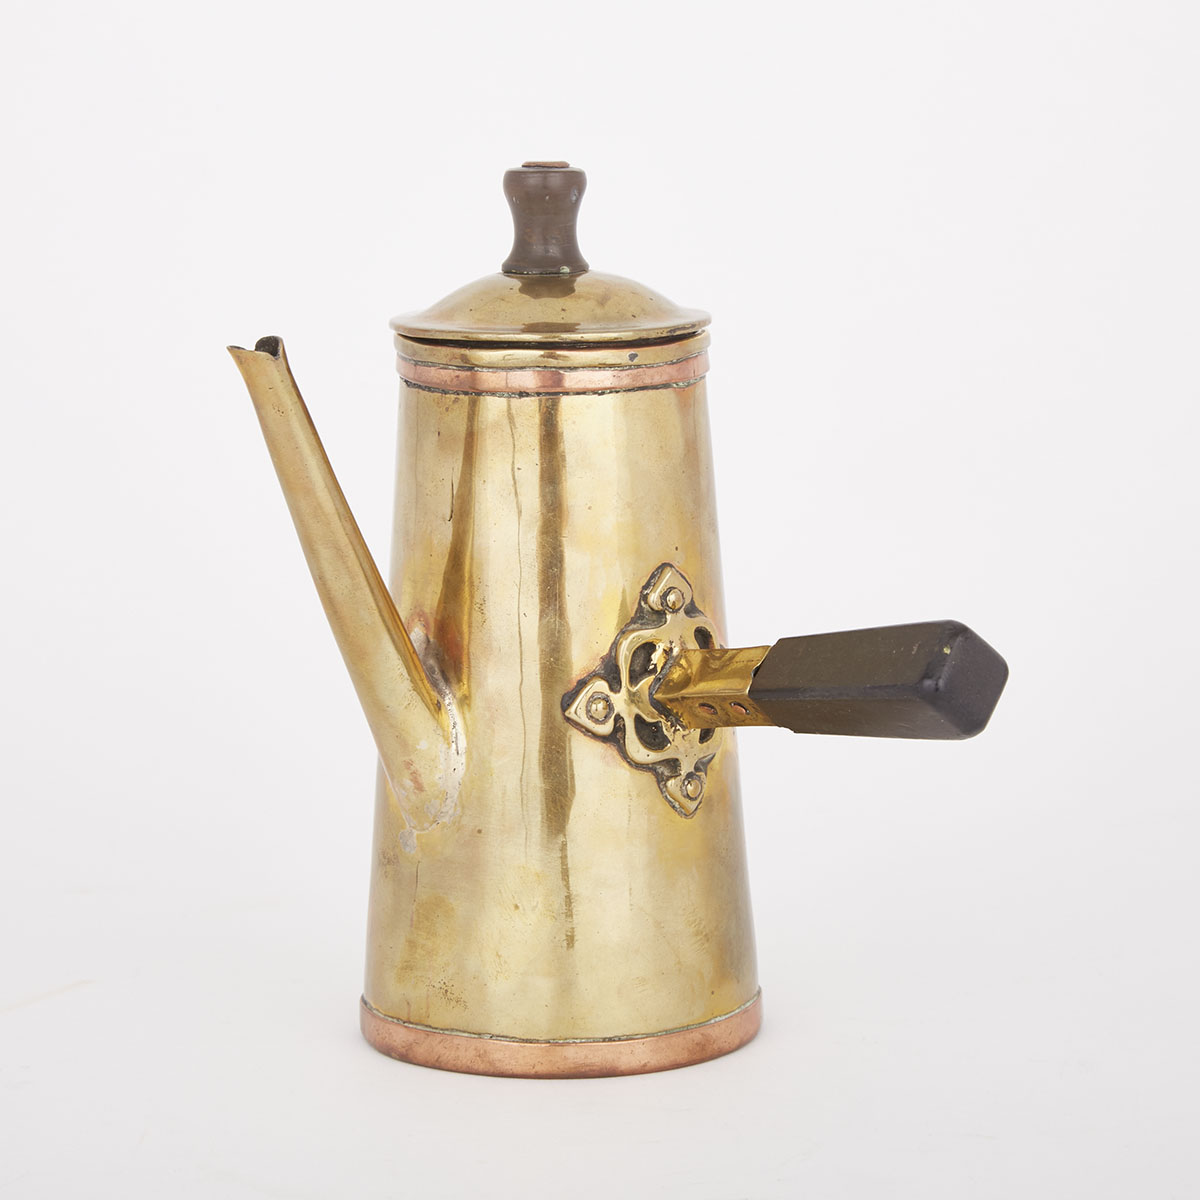 Paul Beau (1871-1941) Brass and Copper Cocoa Pot, early 20th century